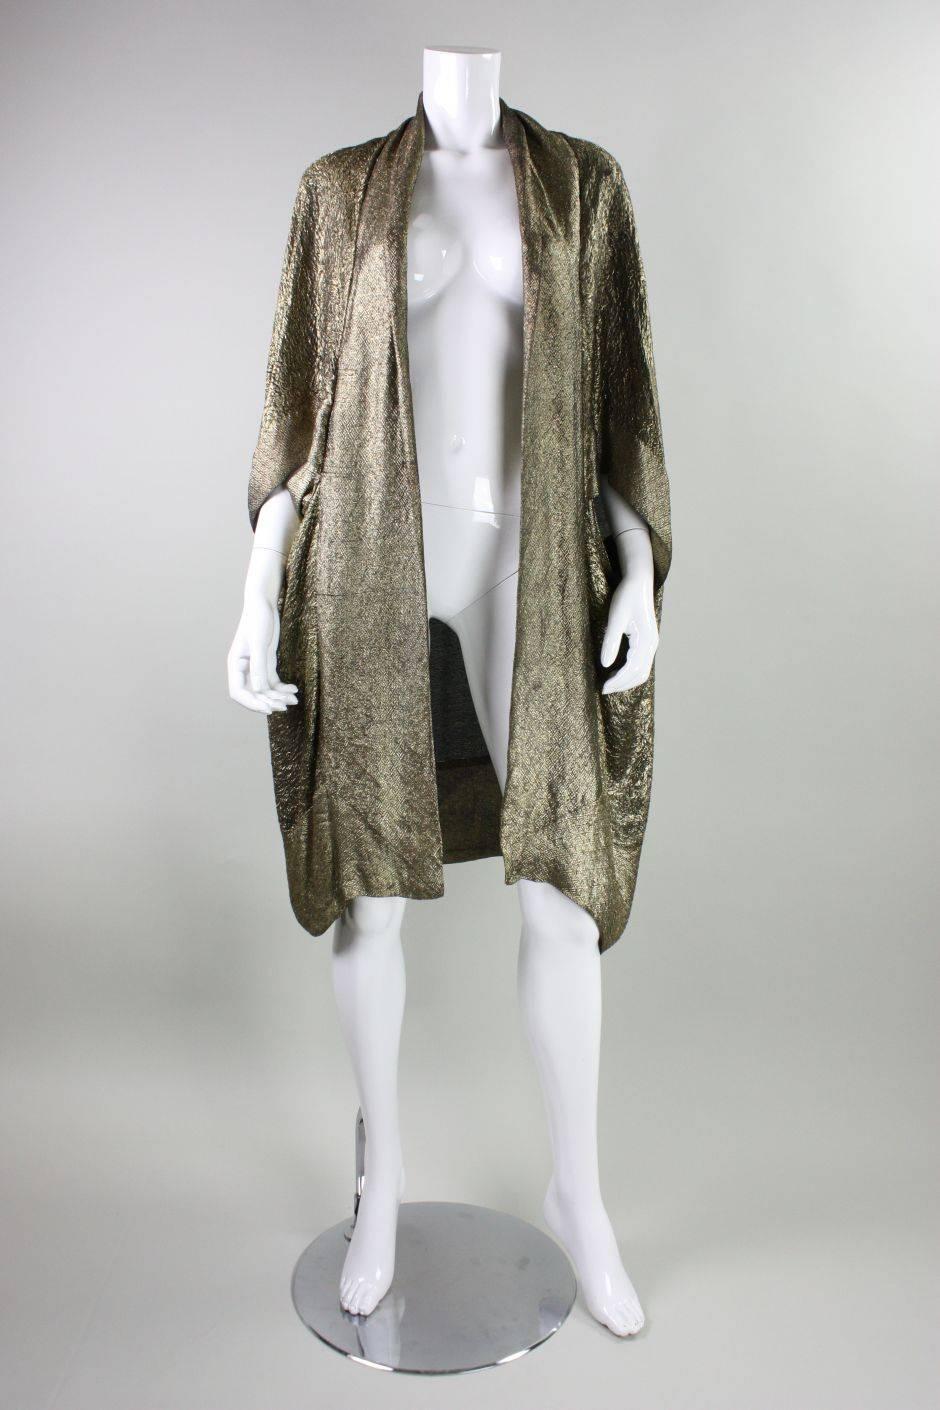 Vintage coat by Liberty of London dates to the Art Deco era during the 1920's.  It is made of fine gold lame fabric with an allover geometric motif.  Shawl lapel.  A series of pintucks at the back neck provide volume. No closures.  Unlined.
No size